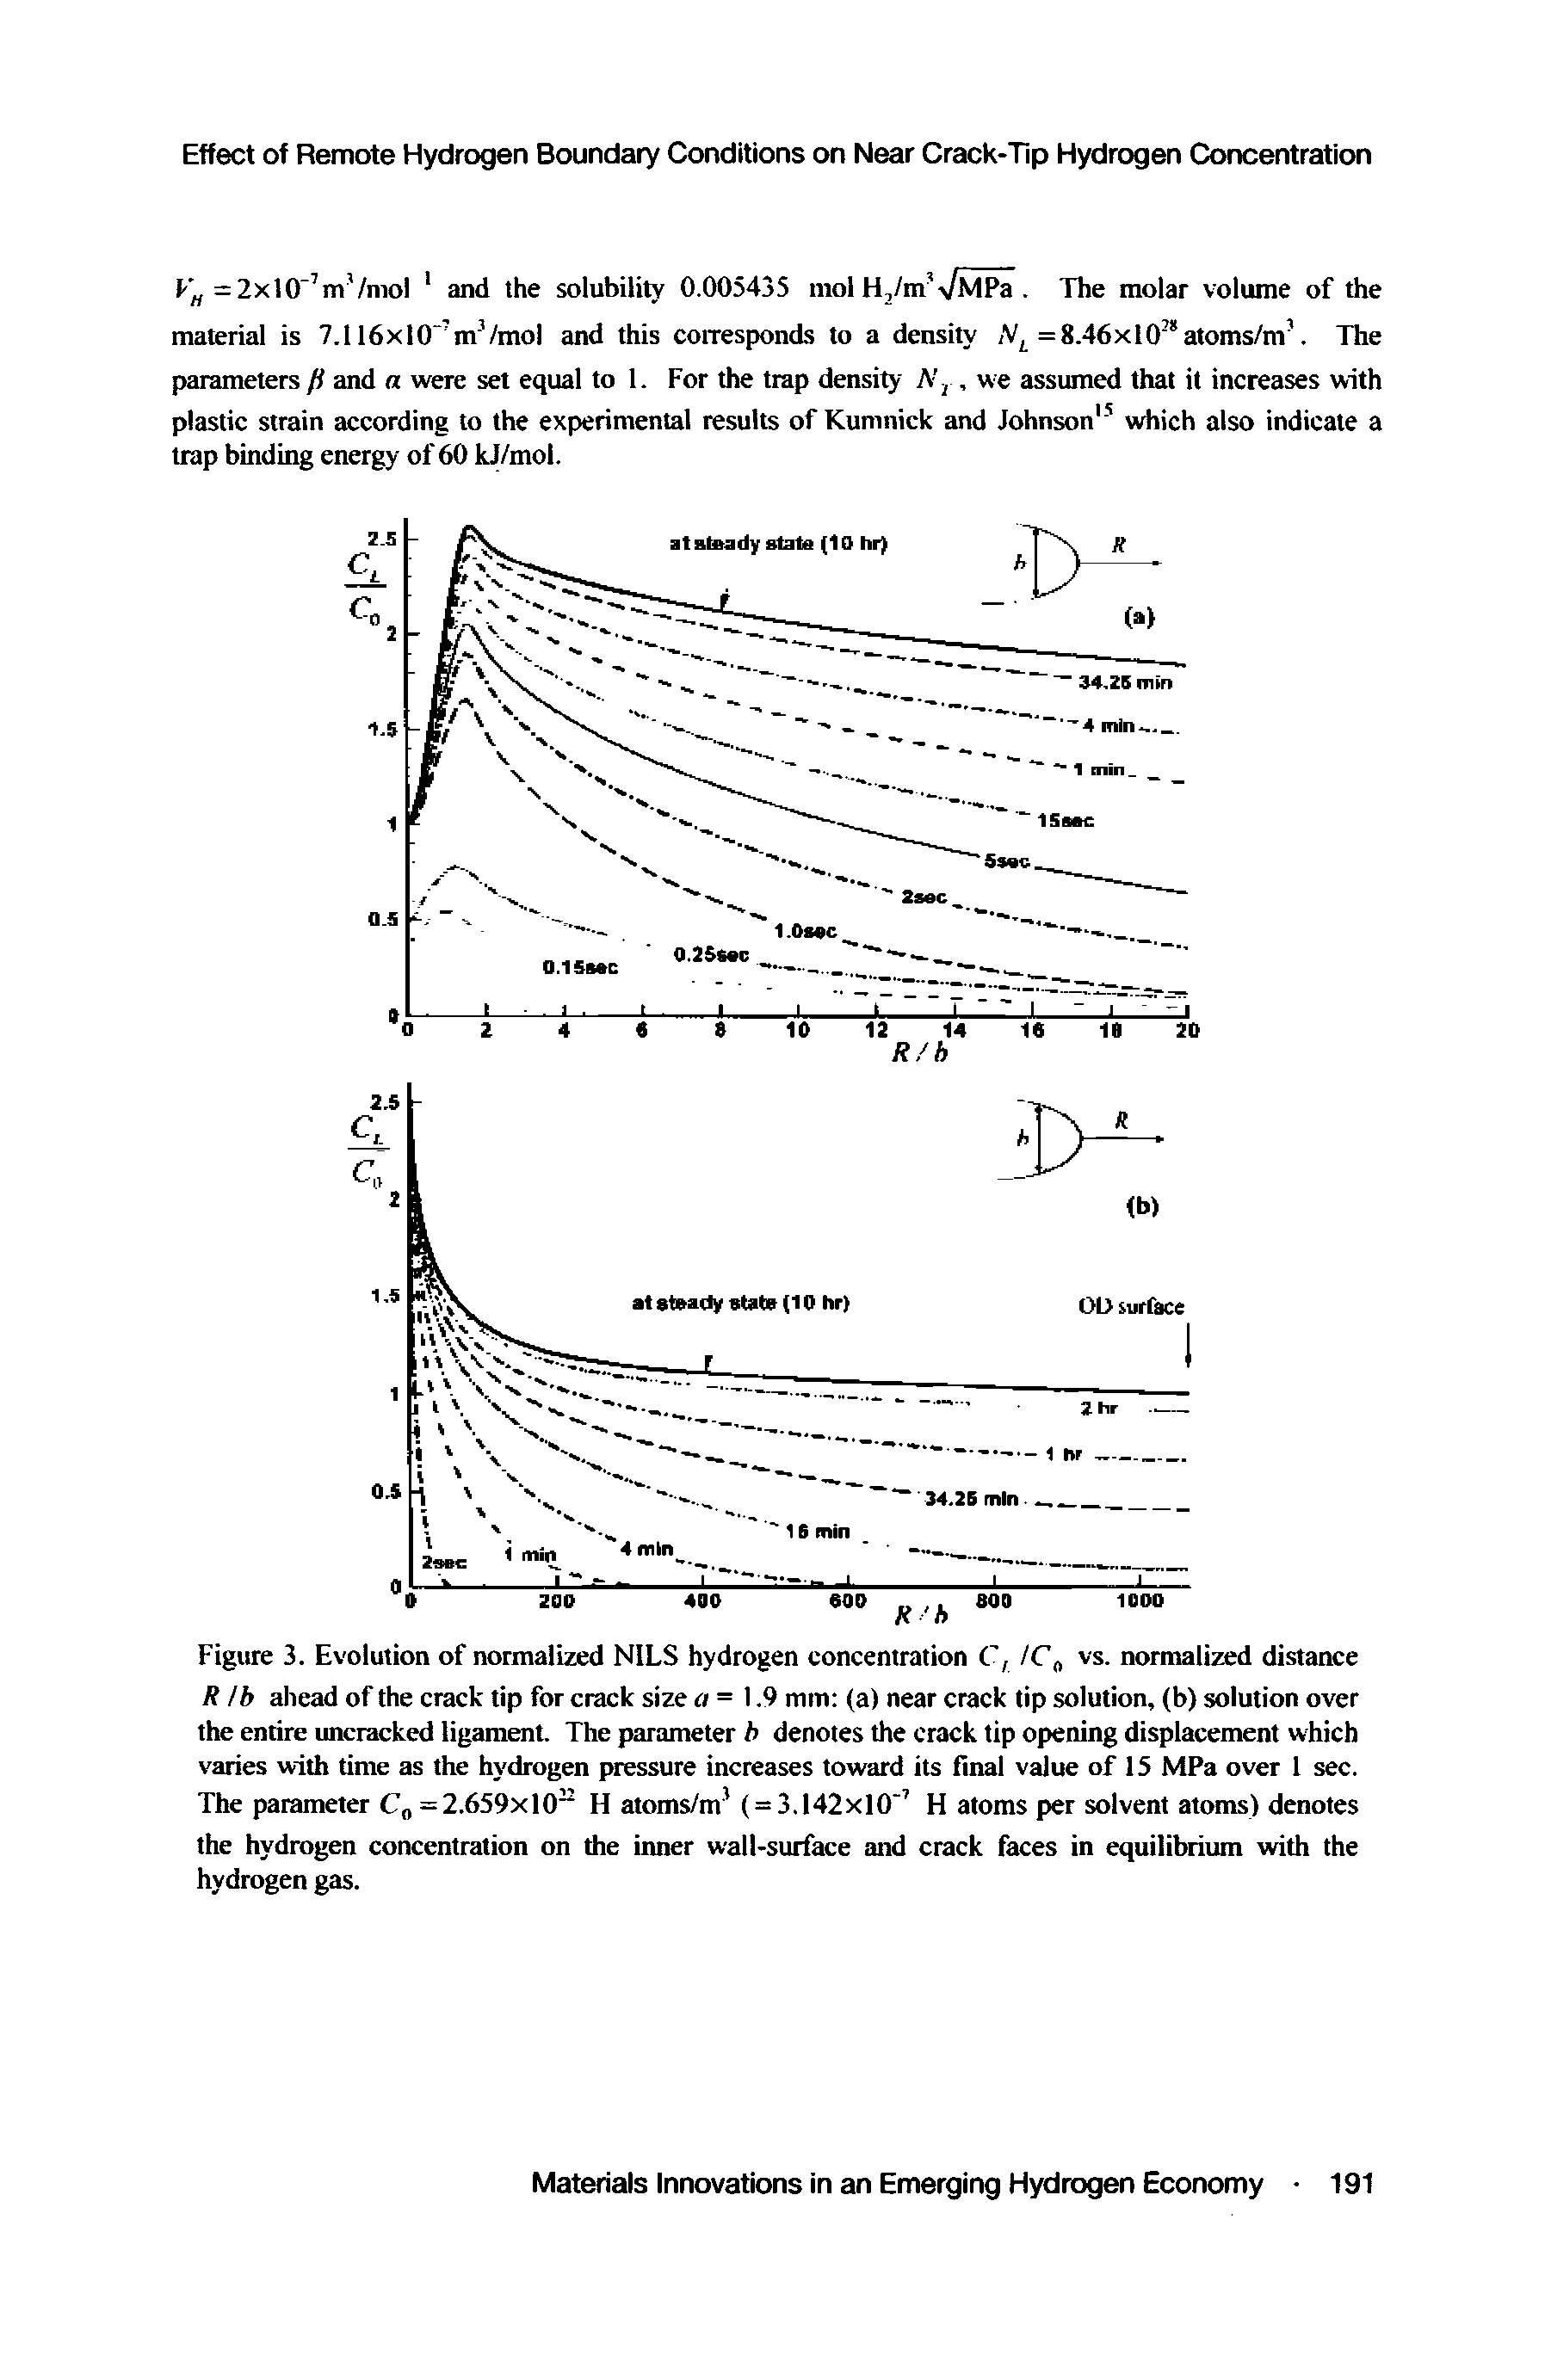 Figure 3. Evolution of normalized NILS hydrogen concentration C, IC vs. normalized distance R lb ahead of the crack tip for crack size r/ = 1.9 mm (a) near crack tip solution, (b) solution over the entire uncracked ligament. The parameter b denotes the crack tip opening displacement which varies with time as the hydrogen pressure increases toward its final value of 15 MPa over 1 sec. The parameter C =2.659x10 H atoms/m ( = 3.142x10 H atoms per solvent atoms) denotes the hydrogen concentration on the inner wall-surface and crack faces in equilibrium with the hydrogen gas.